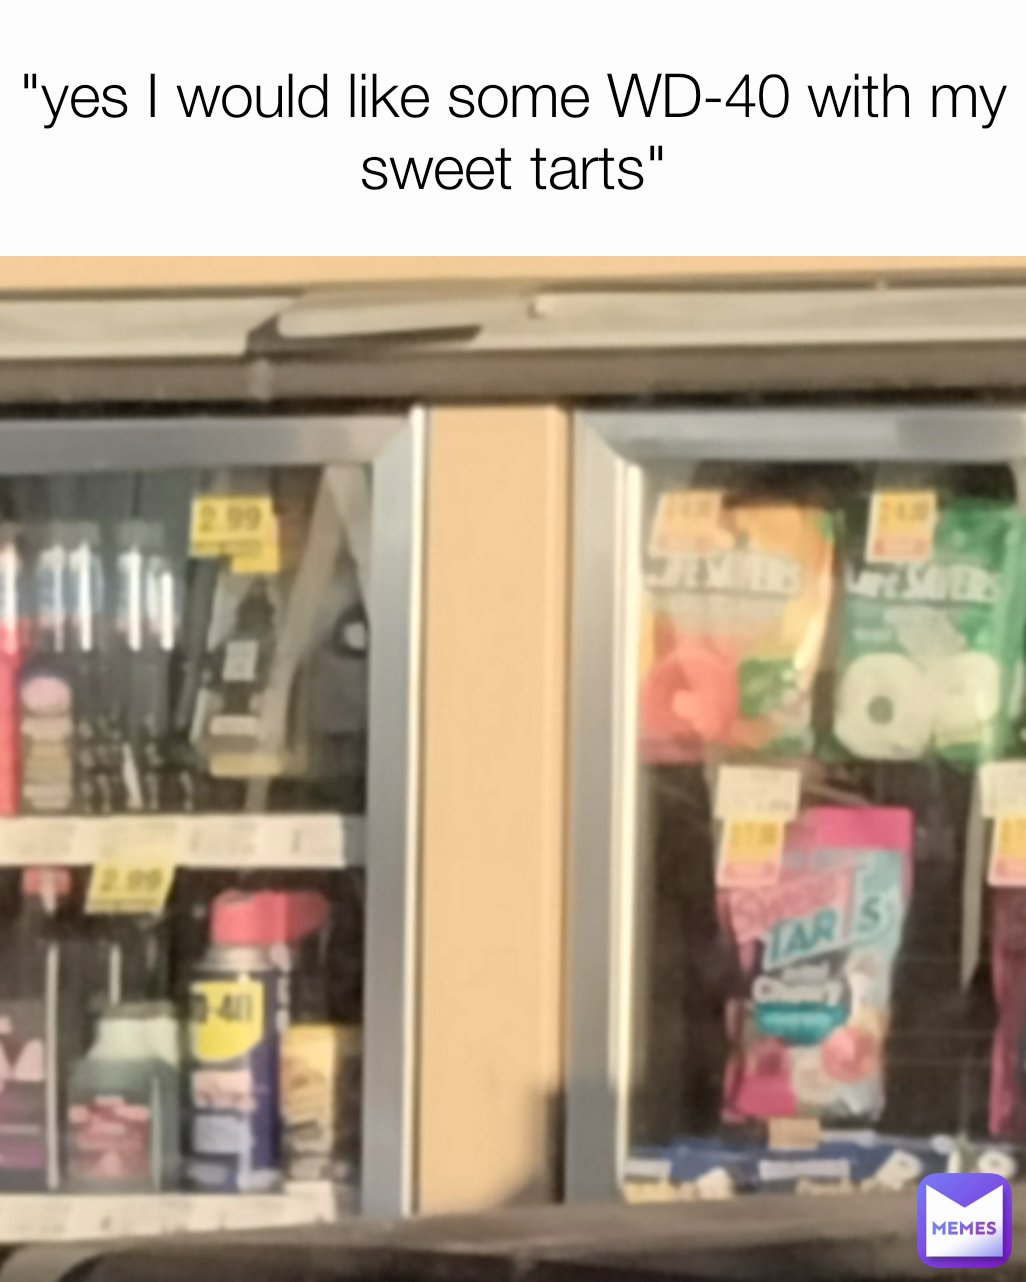 "yes I would like some WD-40 with my sweet tarts"